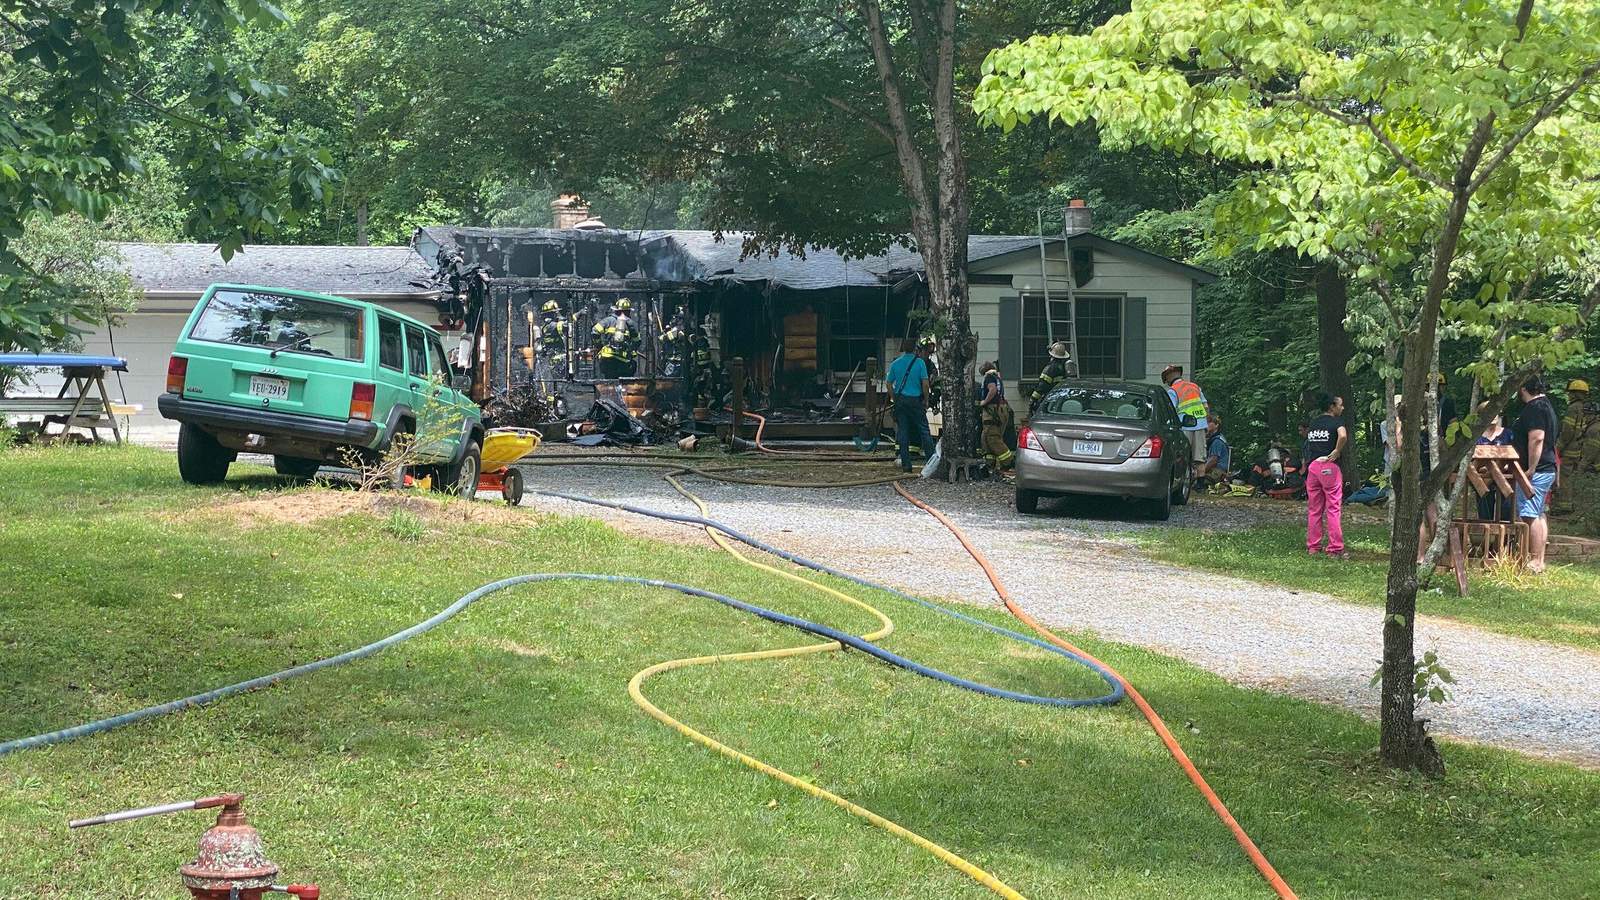 No one hurt in Forest house fire